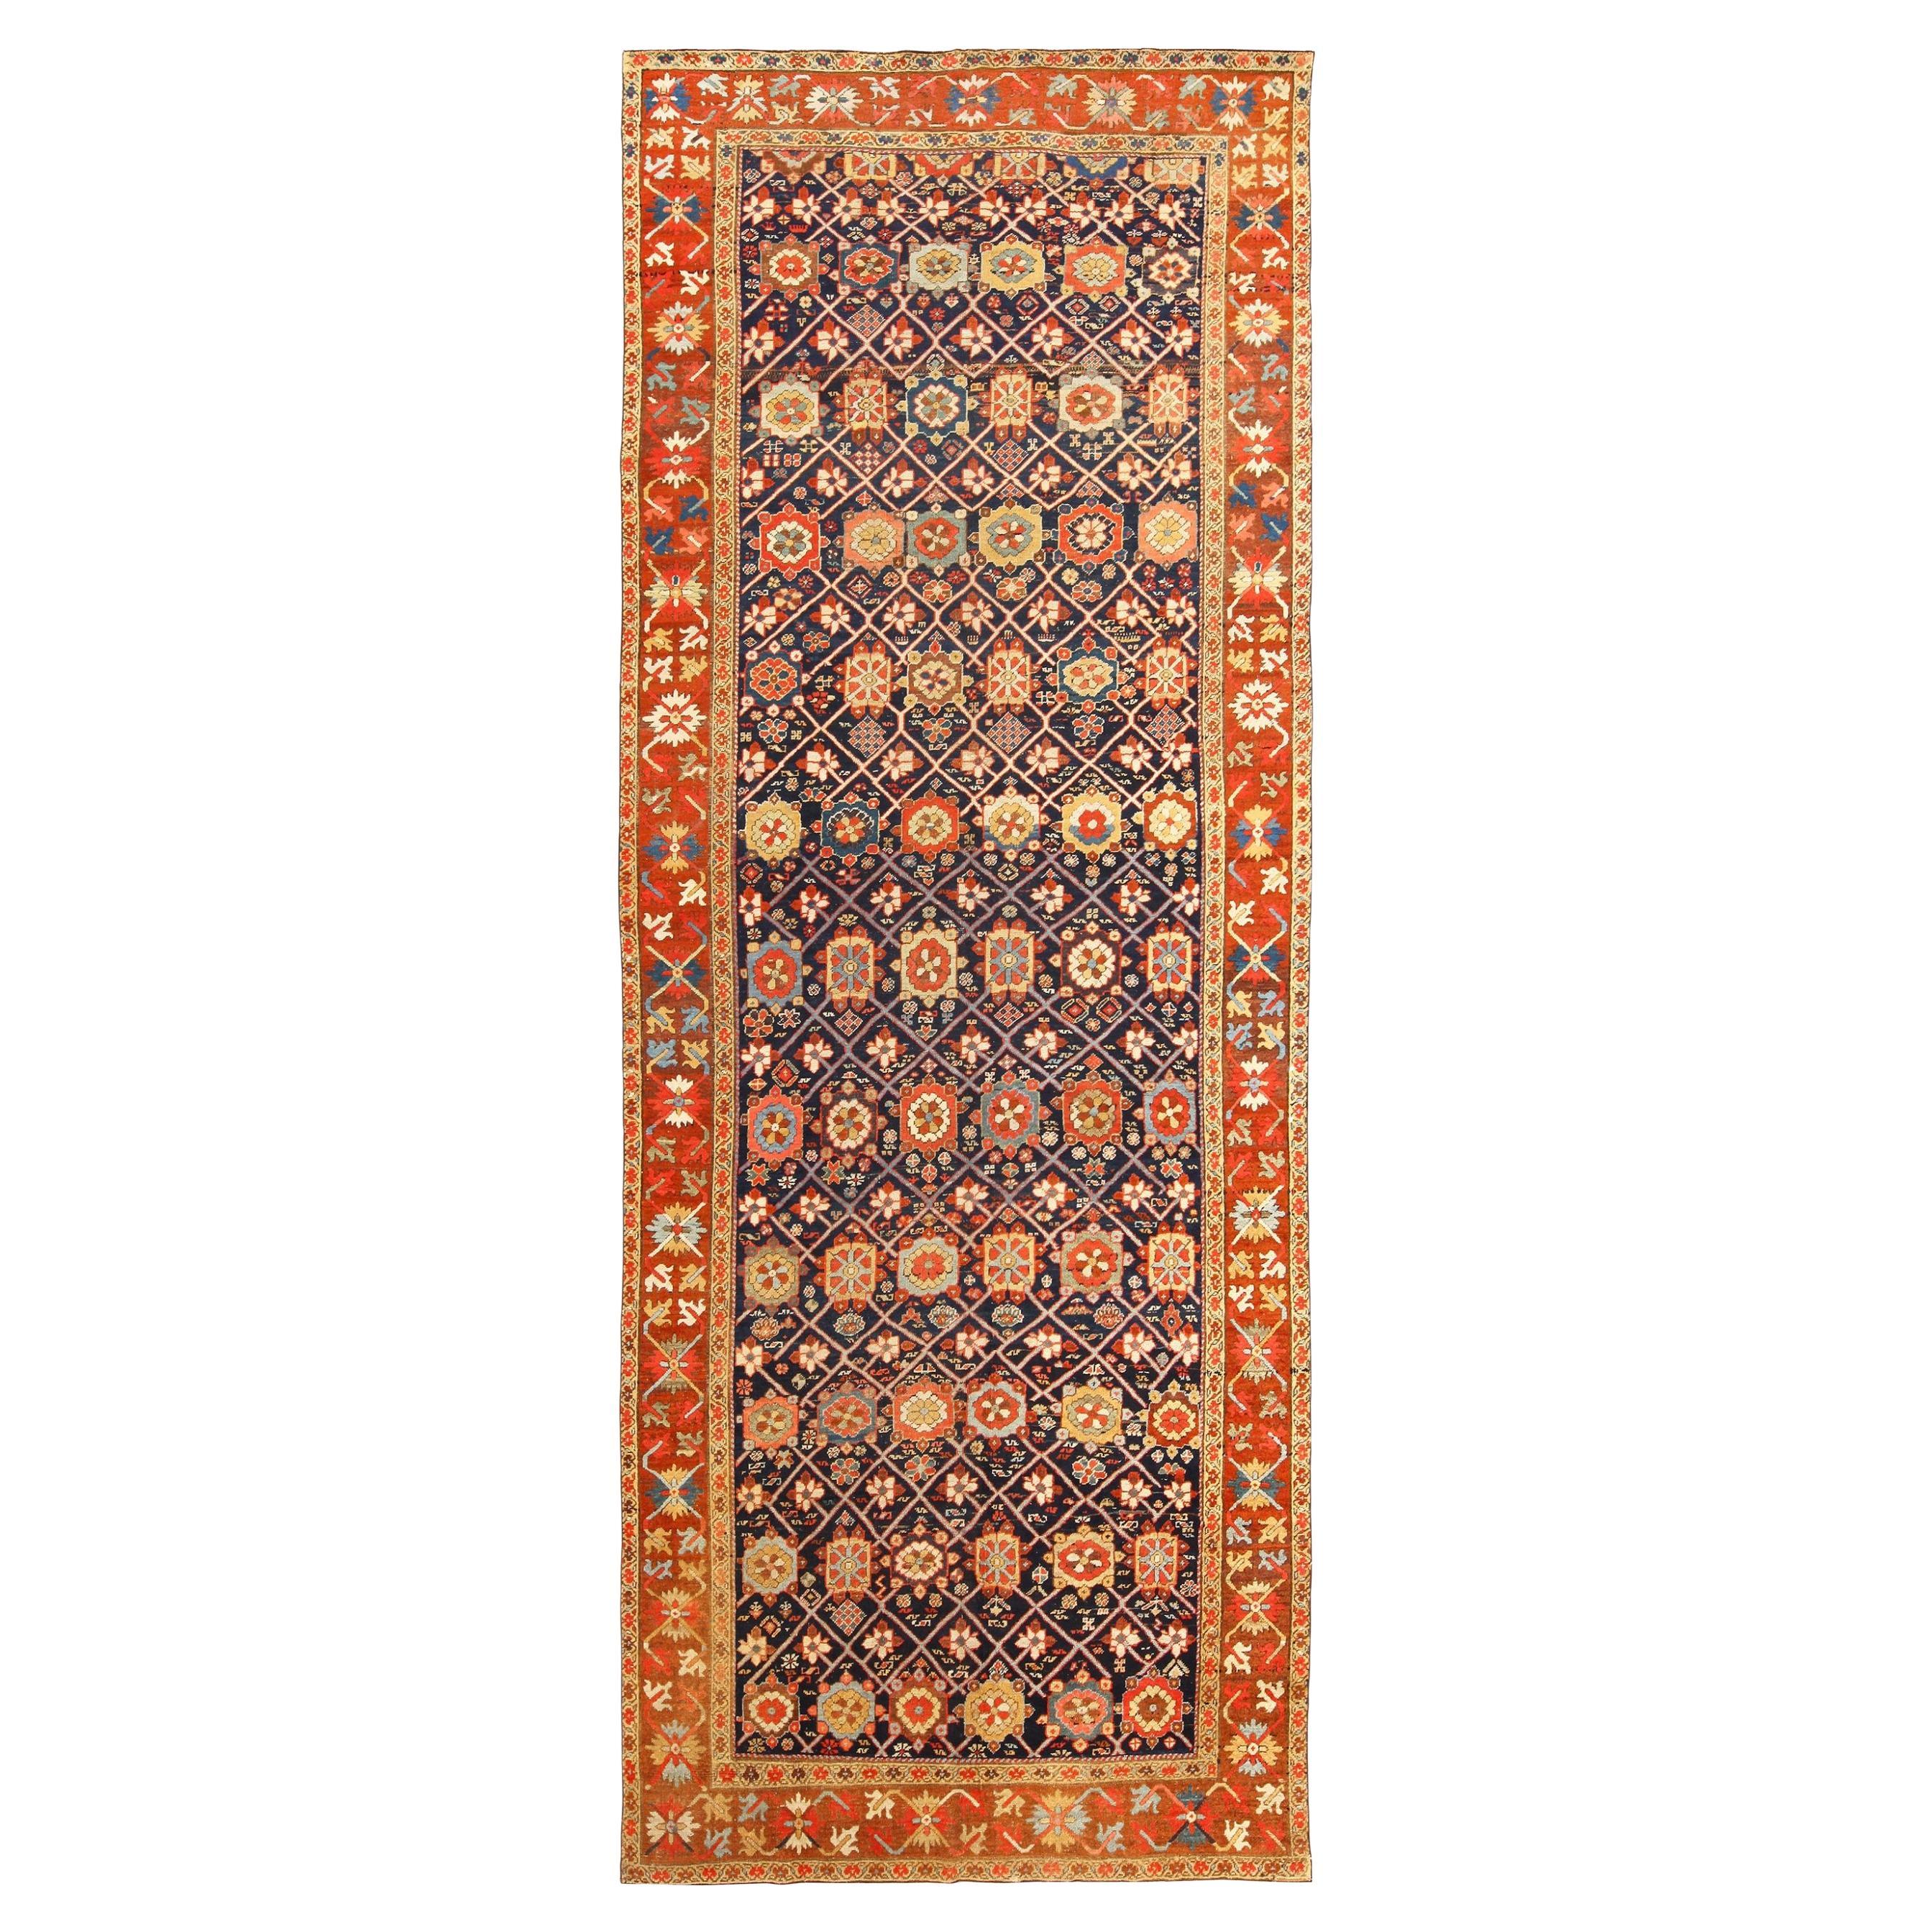 Antique Northwest Persian Rug. Size: 5 ft 5 in x 14 ft 